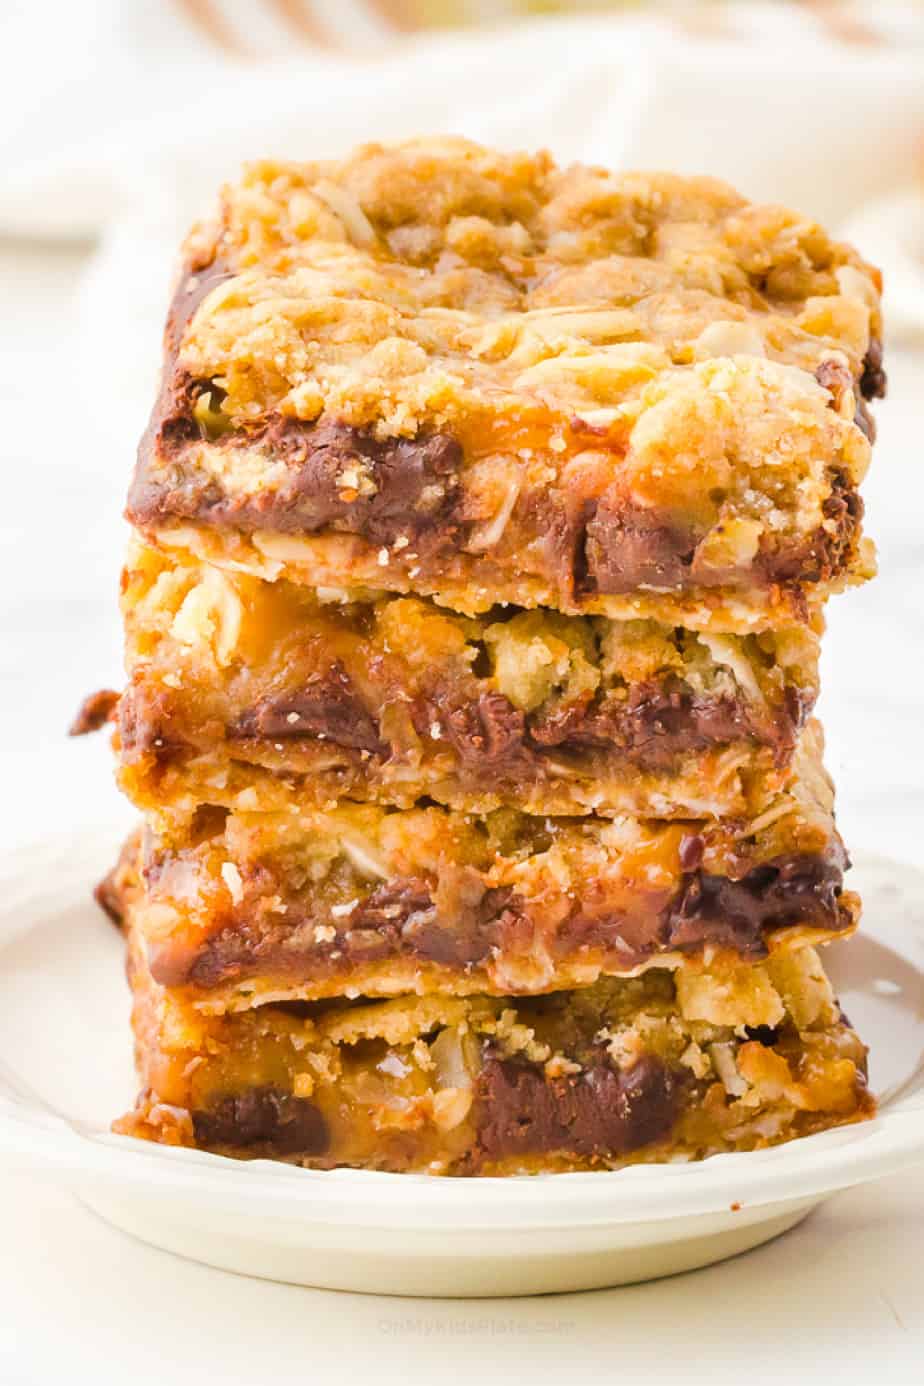 Stack four cookies high of carmelita bars on a plate from the side